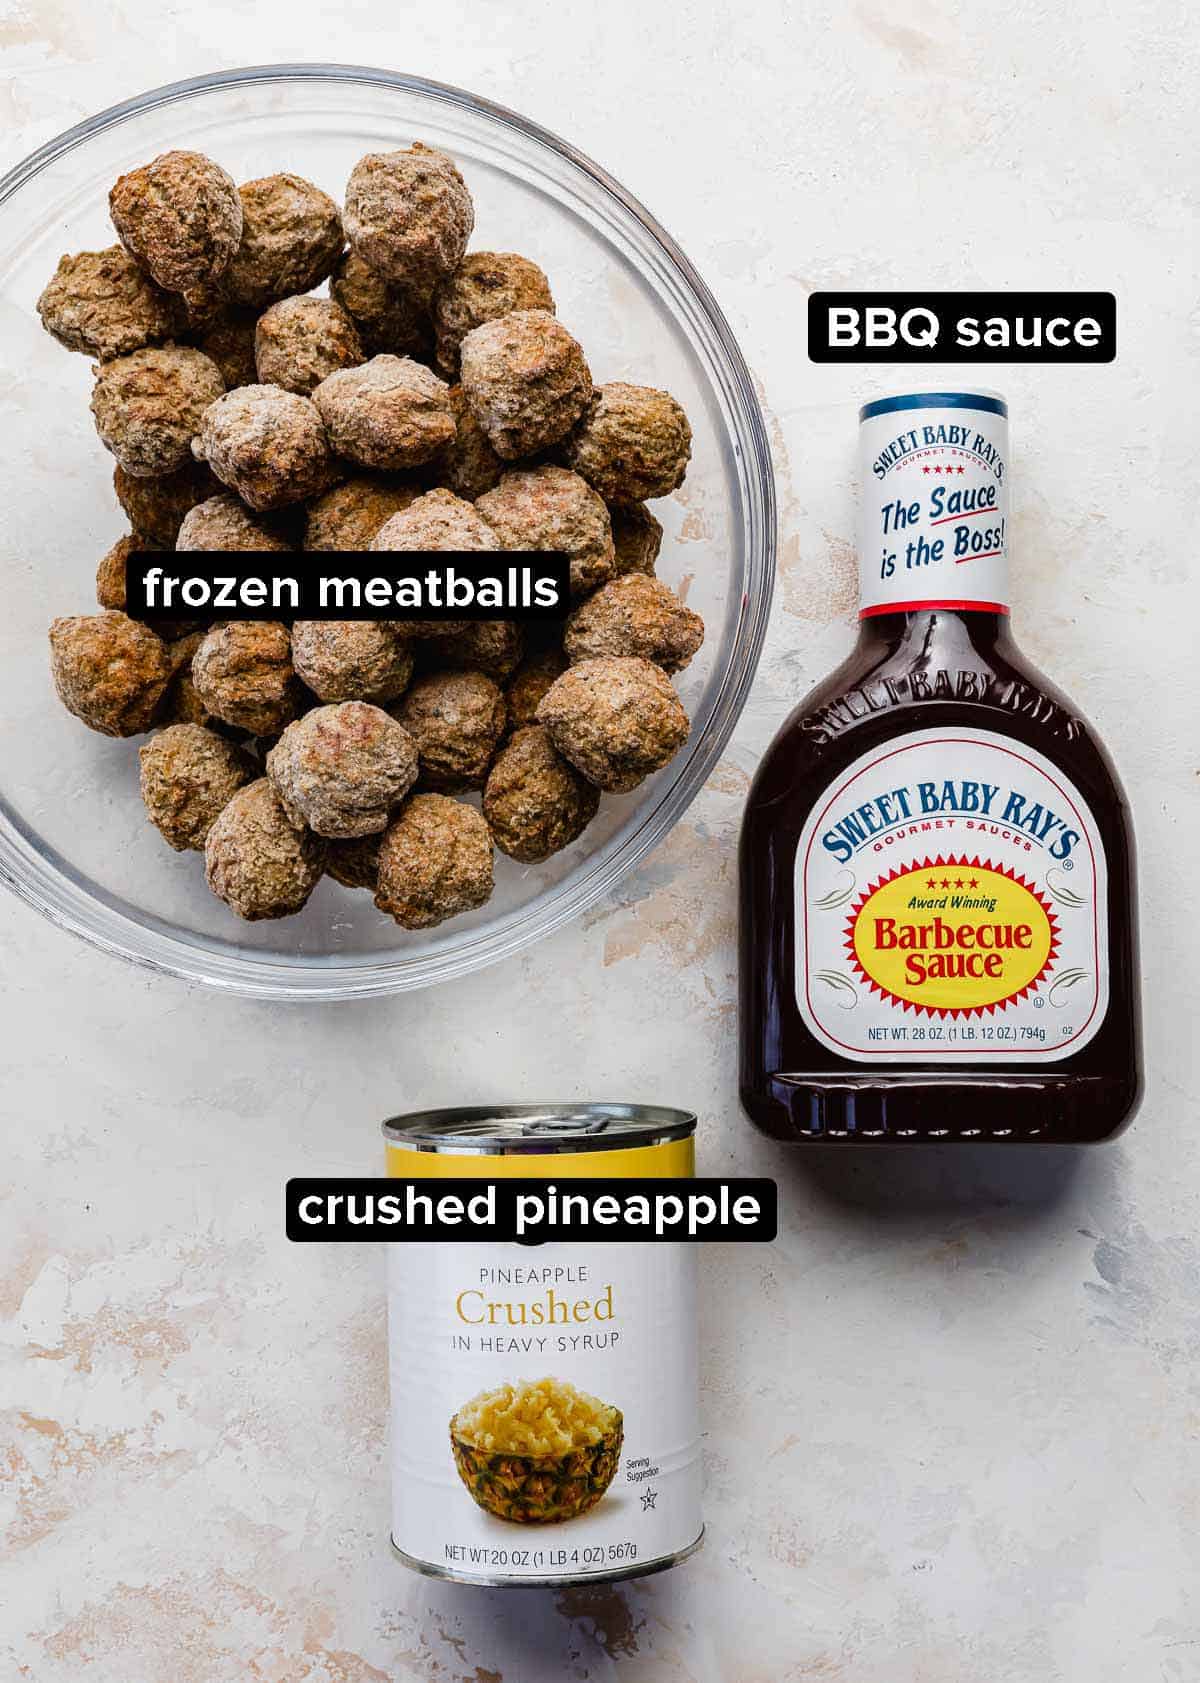 BBQ Pineapple Meatballs ingredients: frozen meatballs, Sweet Baby Rays BBQ sauce bottle, and can of crushed pineapple on a white background.